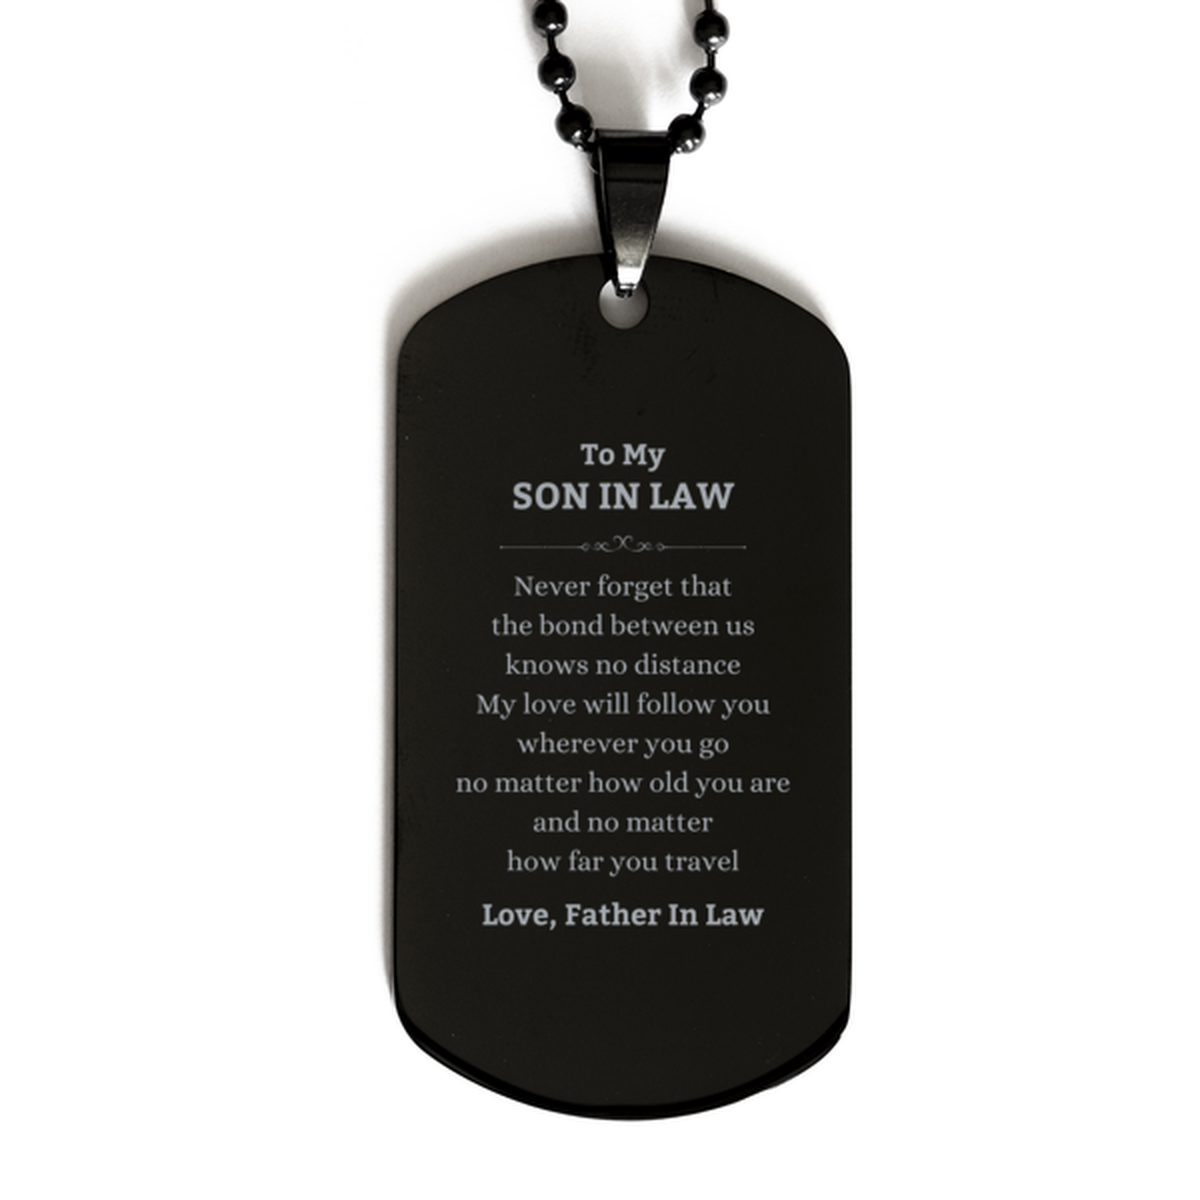 Son In Law Birthday Gifts from Father In Law, Adjustable Black Dog Tag for Son In Law Christmas Graduation Unique Gifts Son In Law Never forget that the bond between us knows no distance. Love, Father In Law